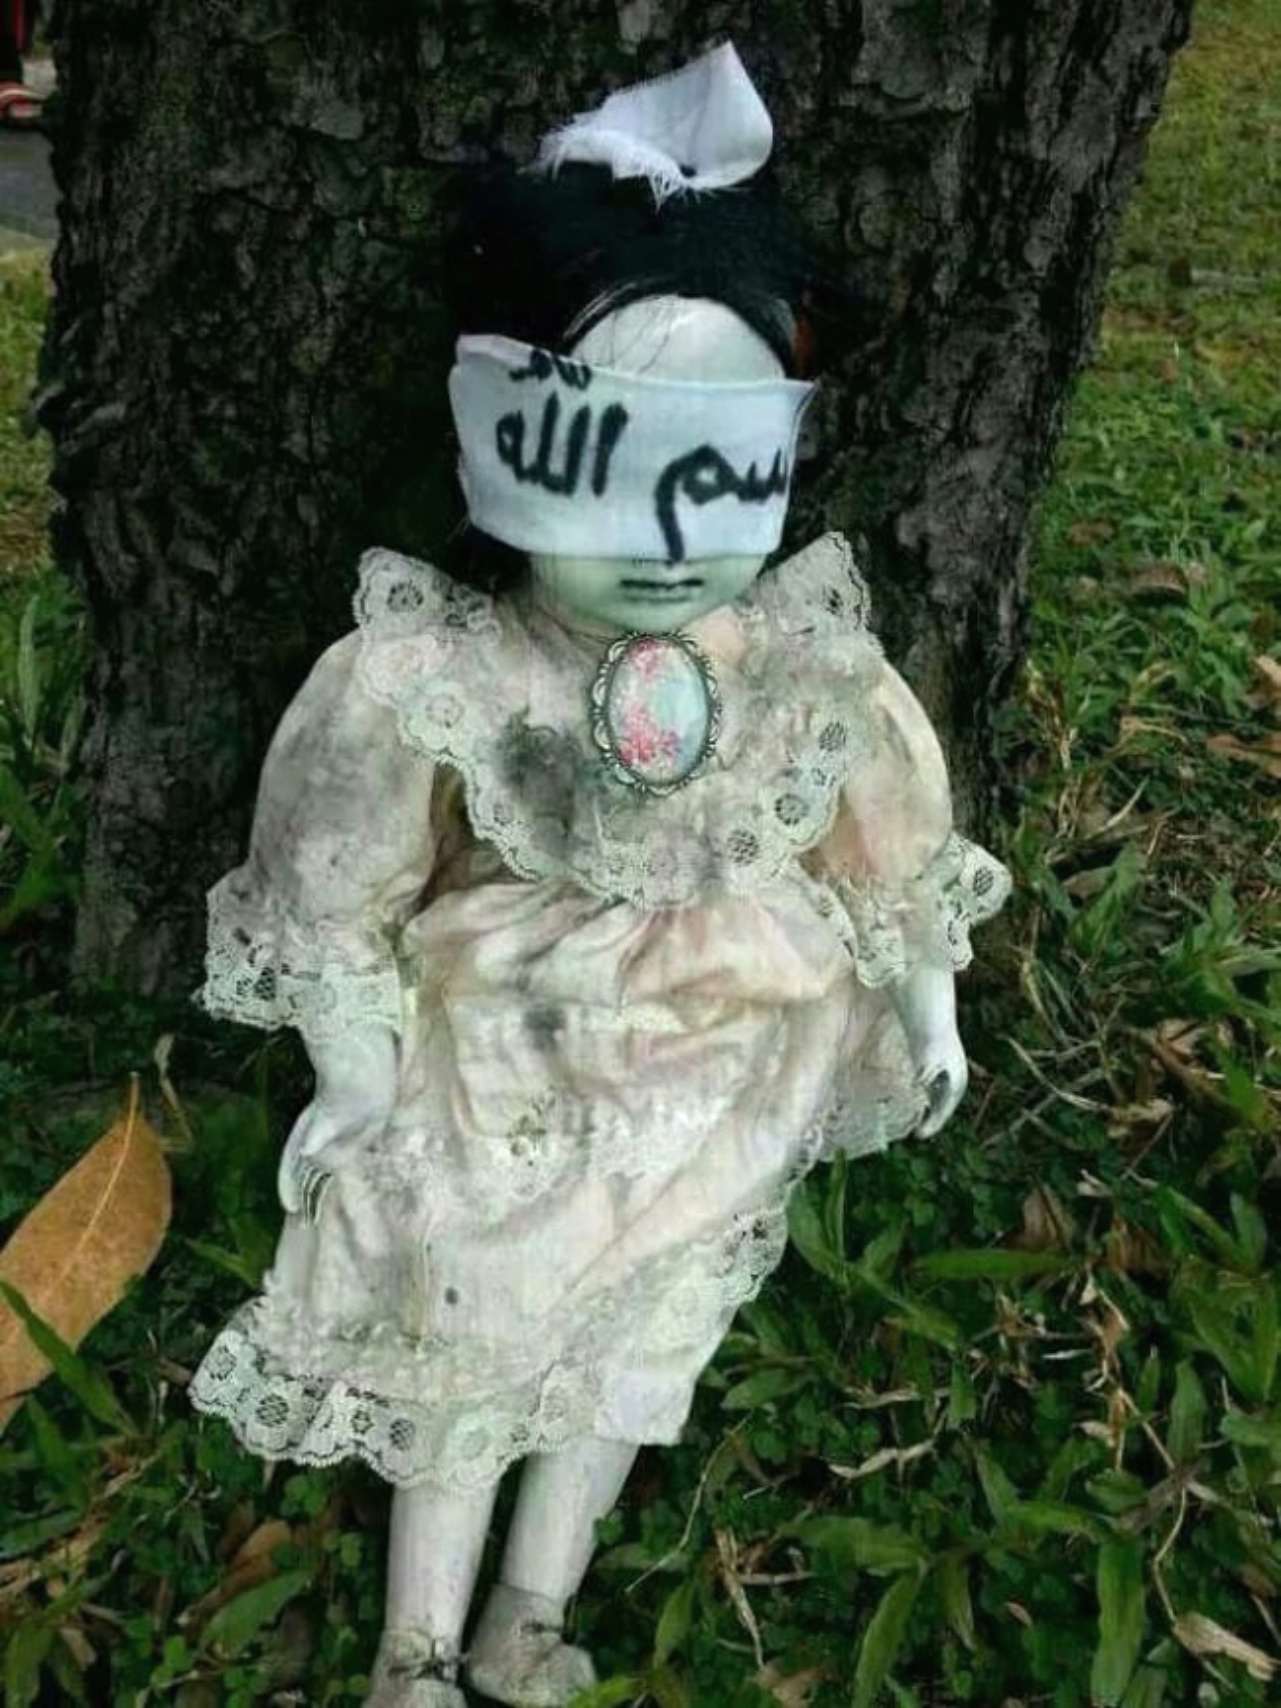 The Blindfolded Doll